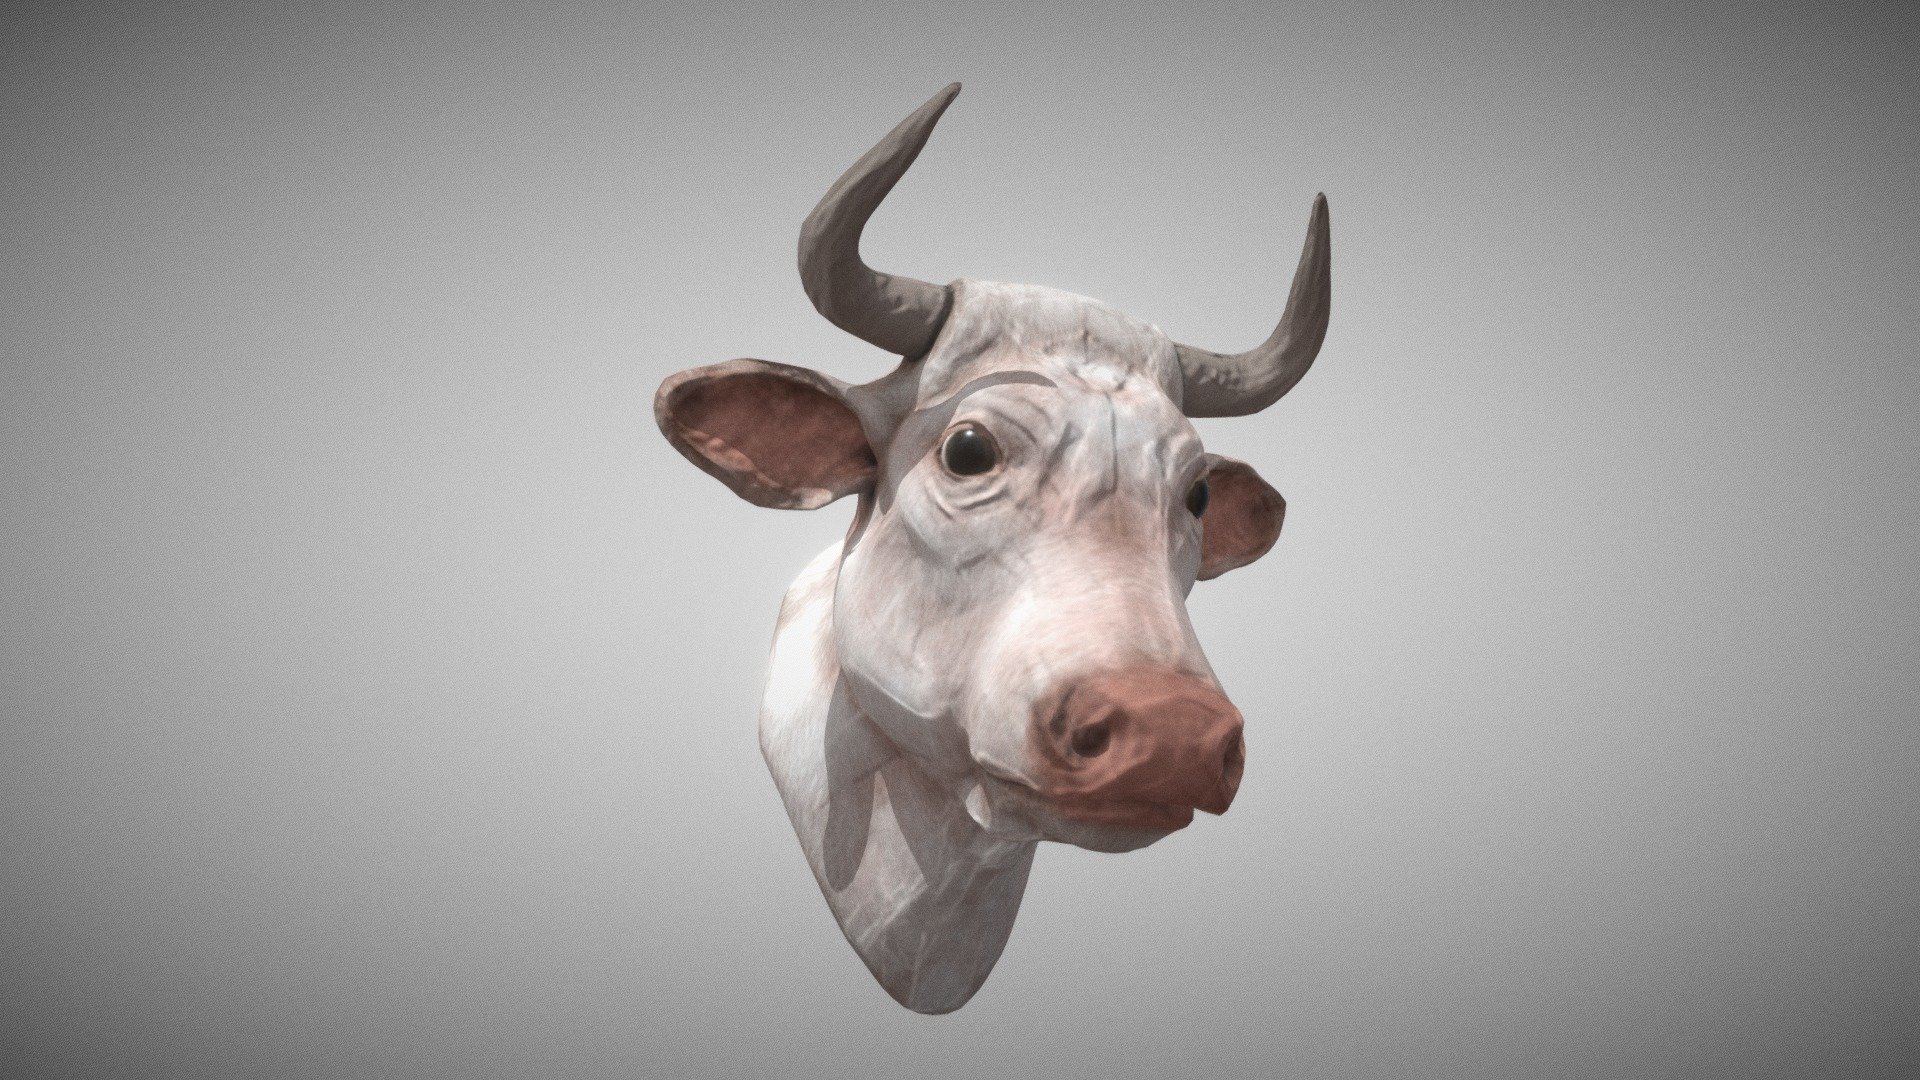 Bulls are much more muscular than cows, with thicker bones, larger feet, a very muscular neck, and a large, bony head with protective ridges over the eyes. These features assist bulls in fighting for domination over a herd, giving the winner superior access to cows for reproduction.

https://en.wikipedia.org/wiki/Bull

A bust sculpted and polypaint textured in zbrush. A full body sculpt and manual retopo/UV coming soon.

see more of my work on my website and instagram:

https://www.tomjohnsonart.co.uk/

https://www.instagram.com/tomjohnsonart/ - Bull - Buy Royalty Free 3D model by Tom Johnson (@Brigyon) 3d model